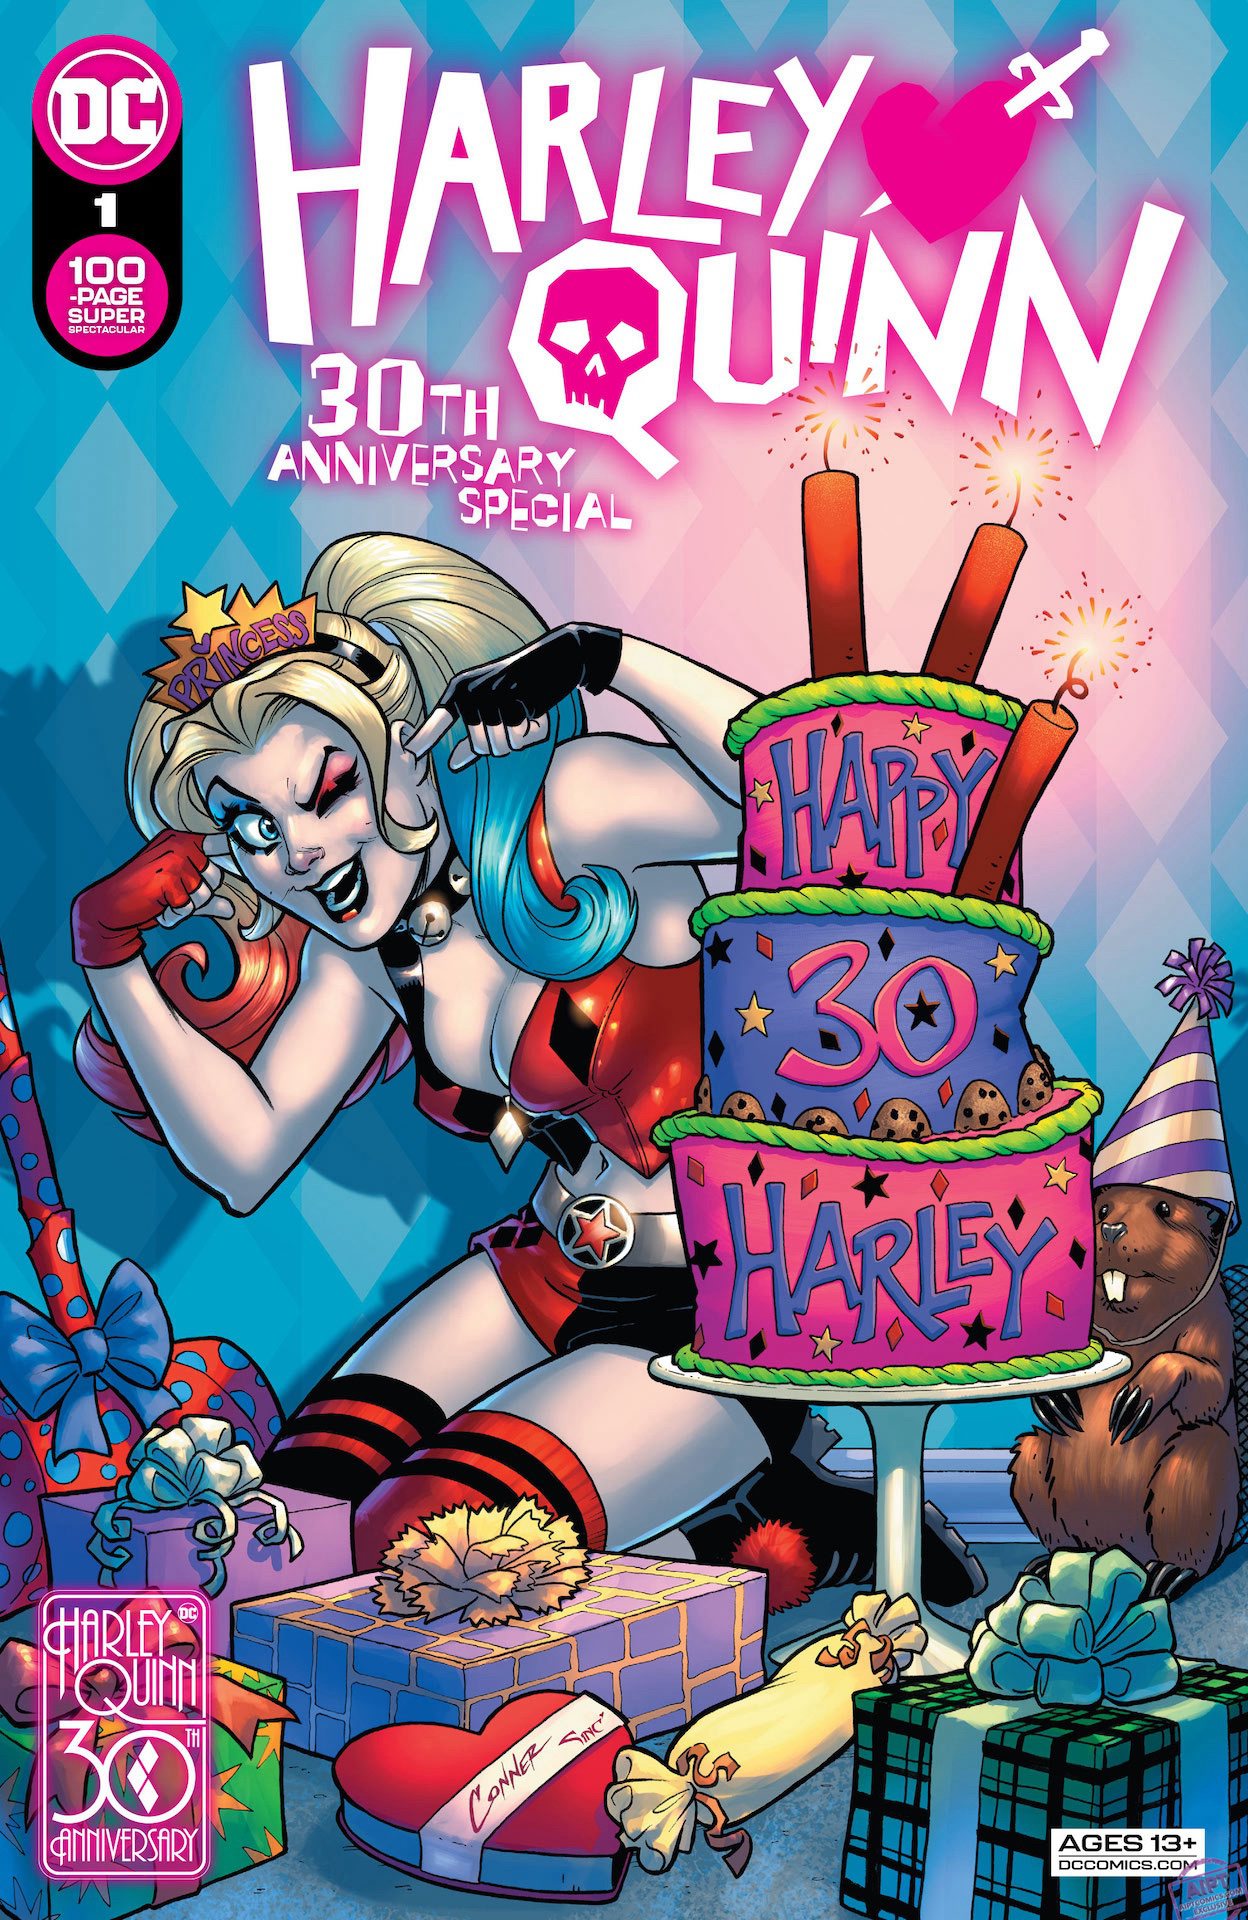 DC Preview: Harley Quinn 30th Anniversary Special #1